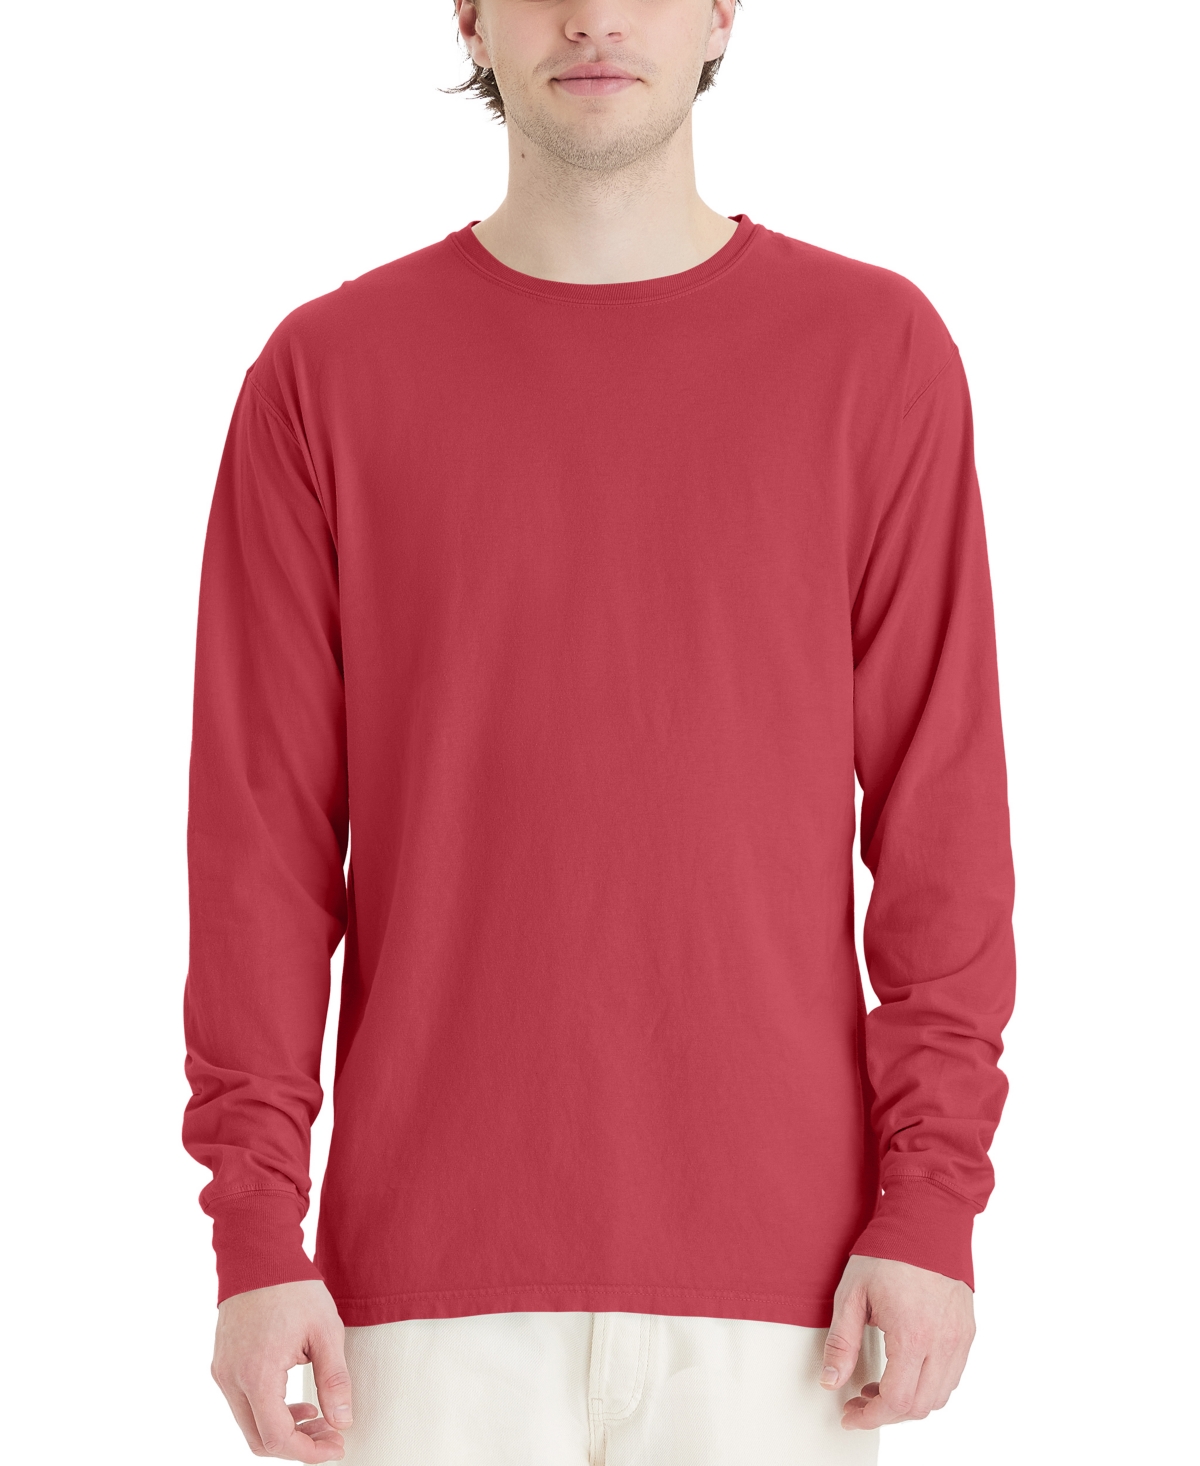 Hanes Unisex Garment Dyed Long Sleeve Cotton T-shirt In Red